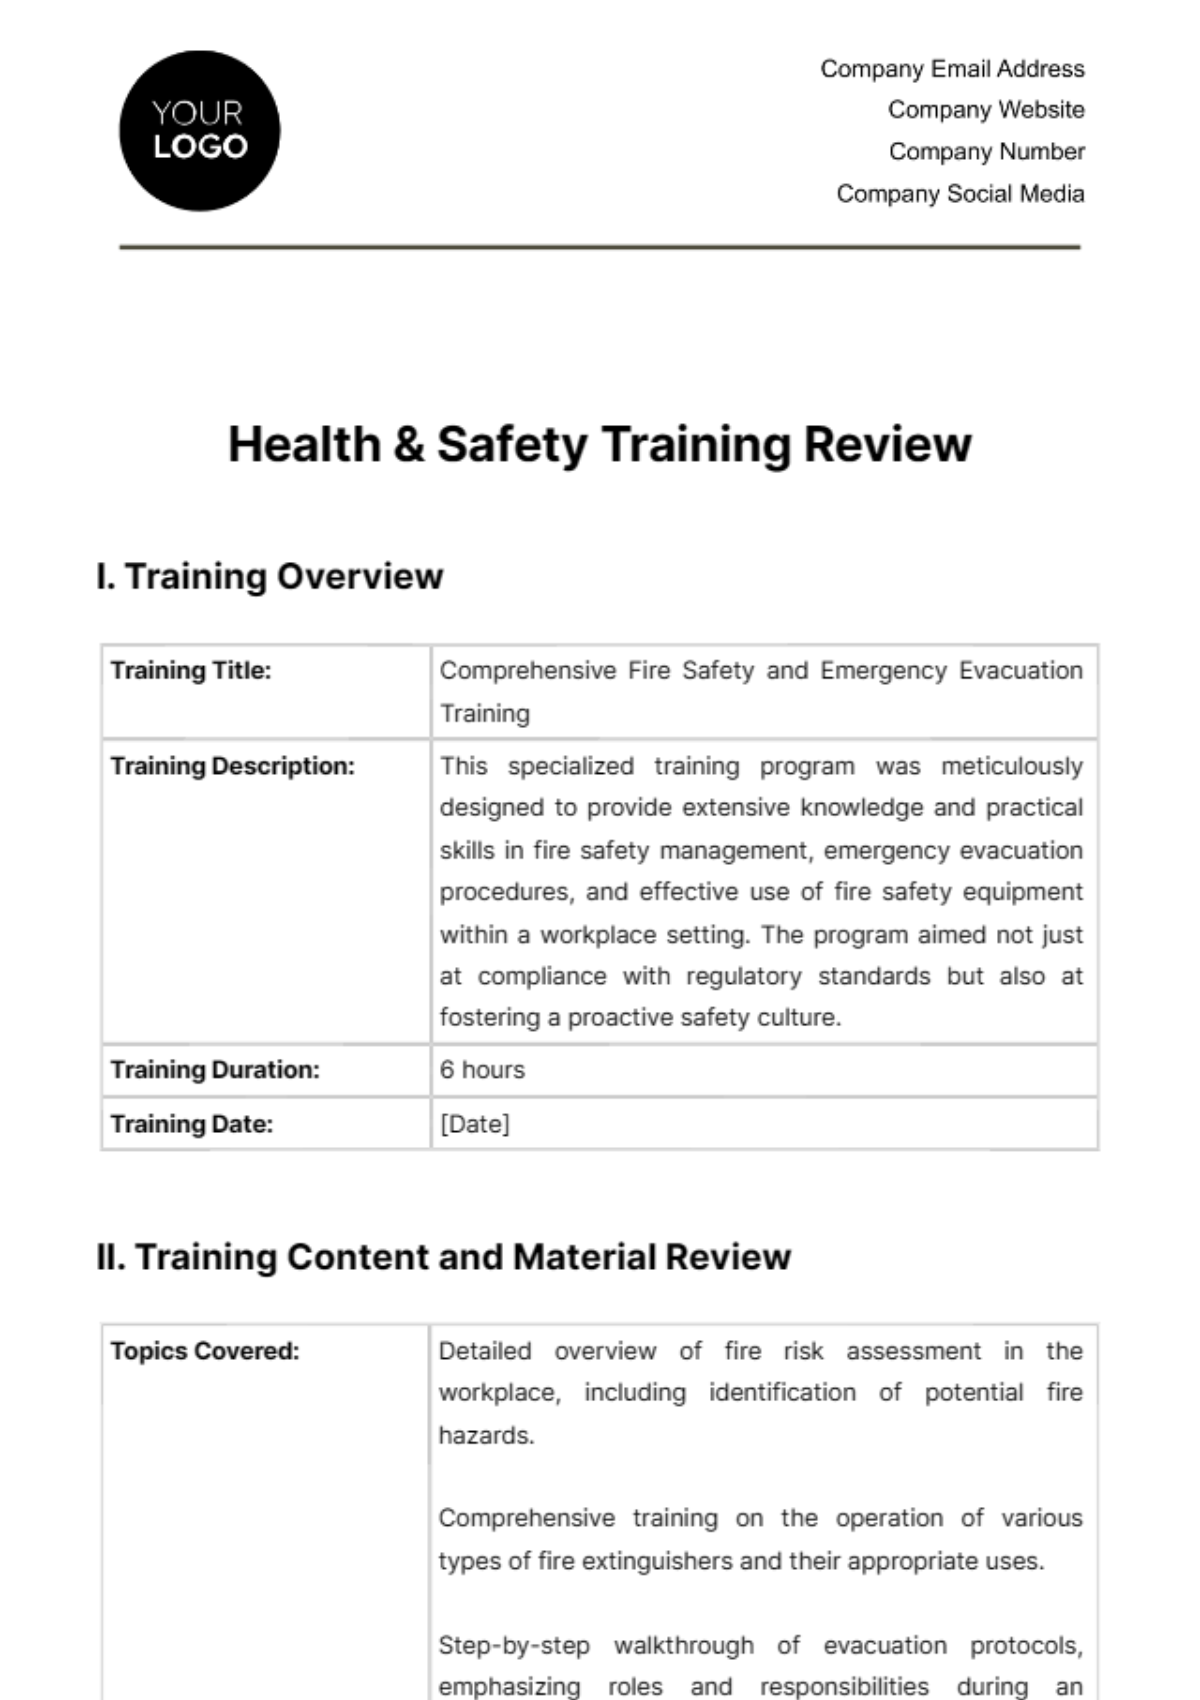 Health & Safety Training Review Template